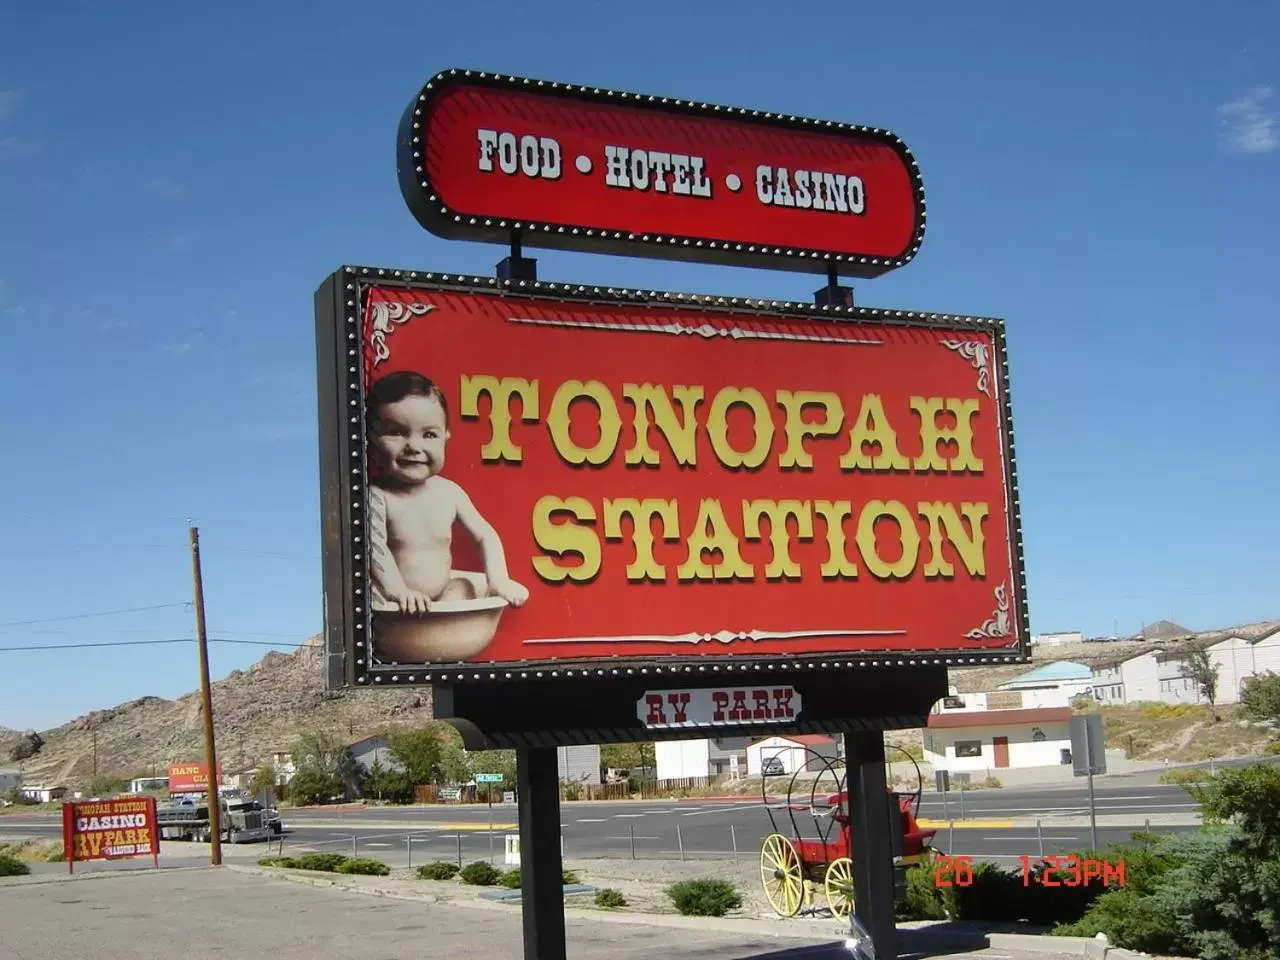 Logo/Certificate/Sign in Tonopah Station Hotel and Casino